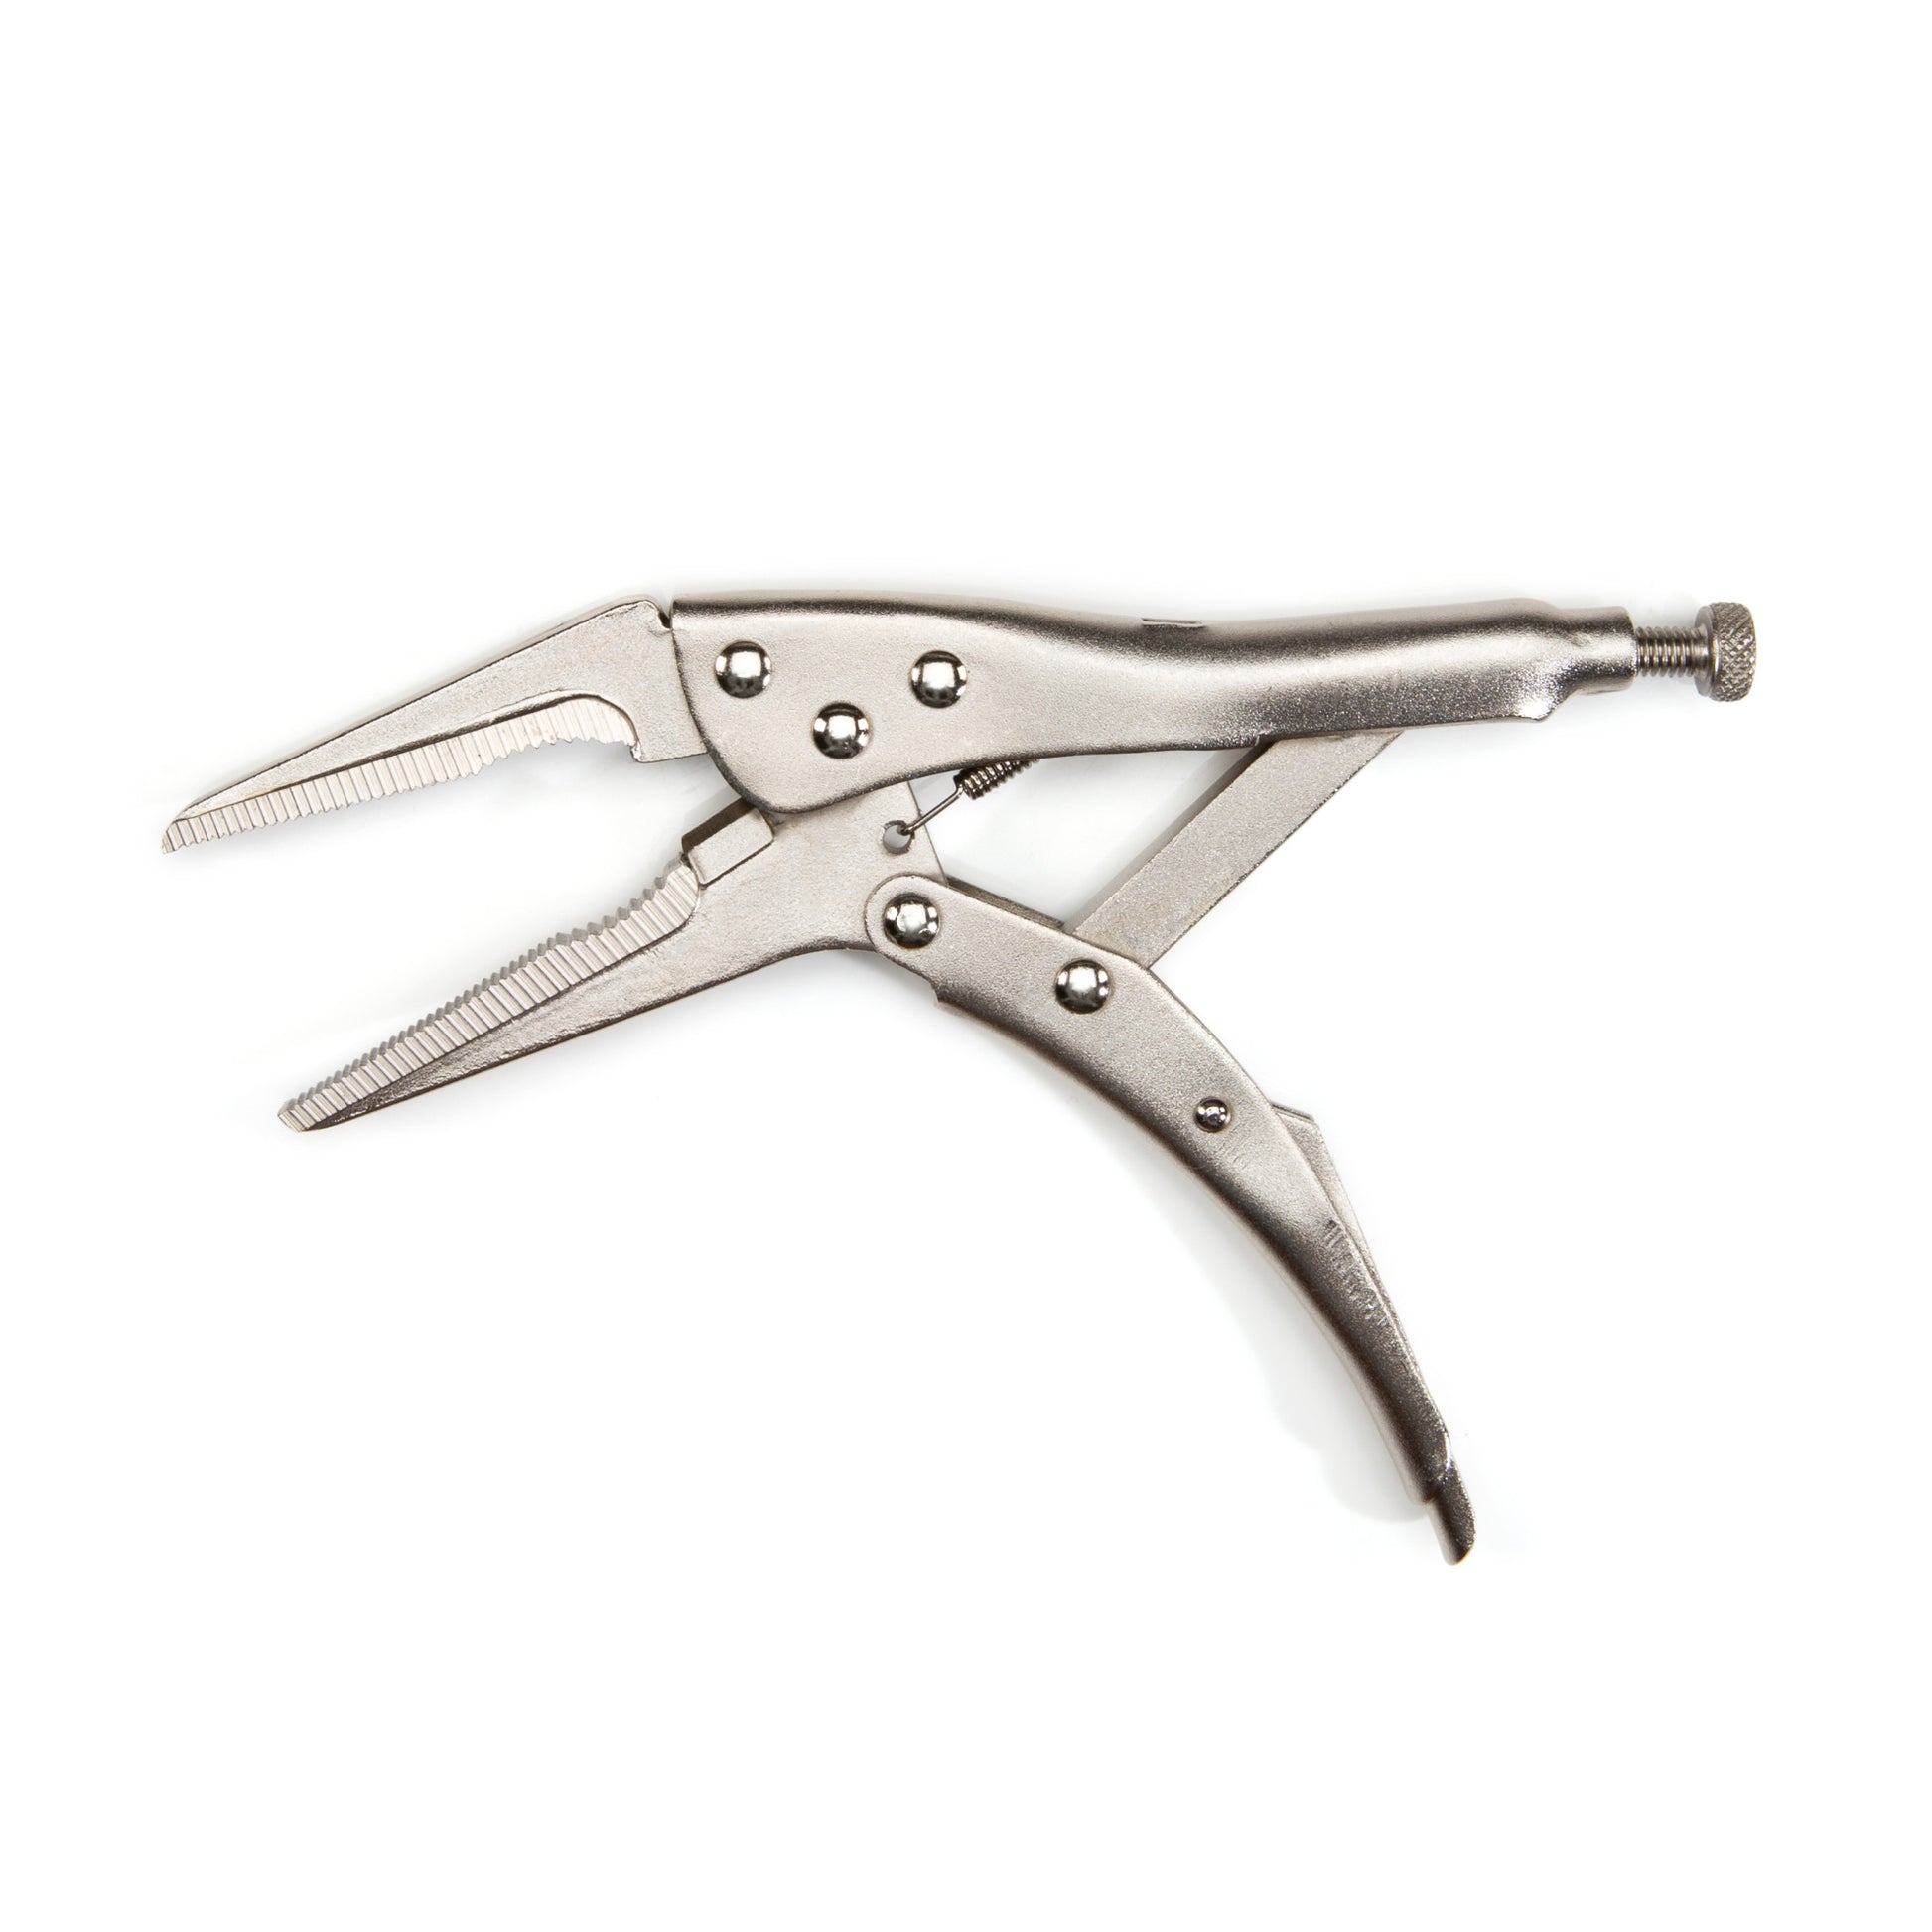 UITCA Curved Needle Nose Pliers #888 6 Long Angled - Bent - N.Y.